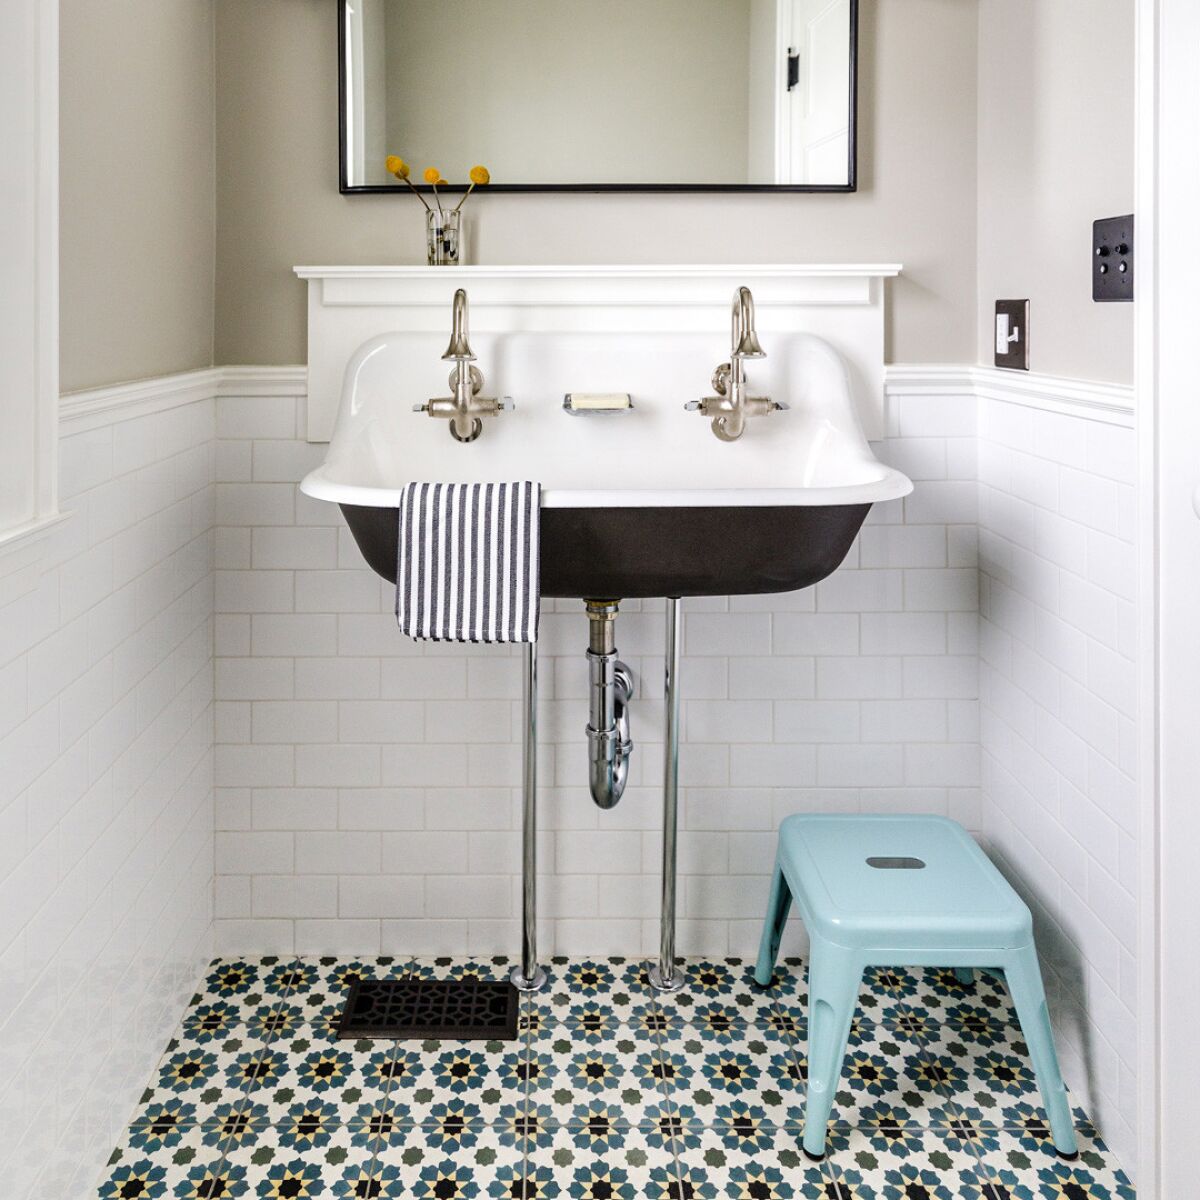 Houzz predicts trough sinks, vintage styling and rustic farmhouse details will combine with transitional styling for an urban-inspired update.